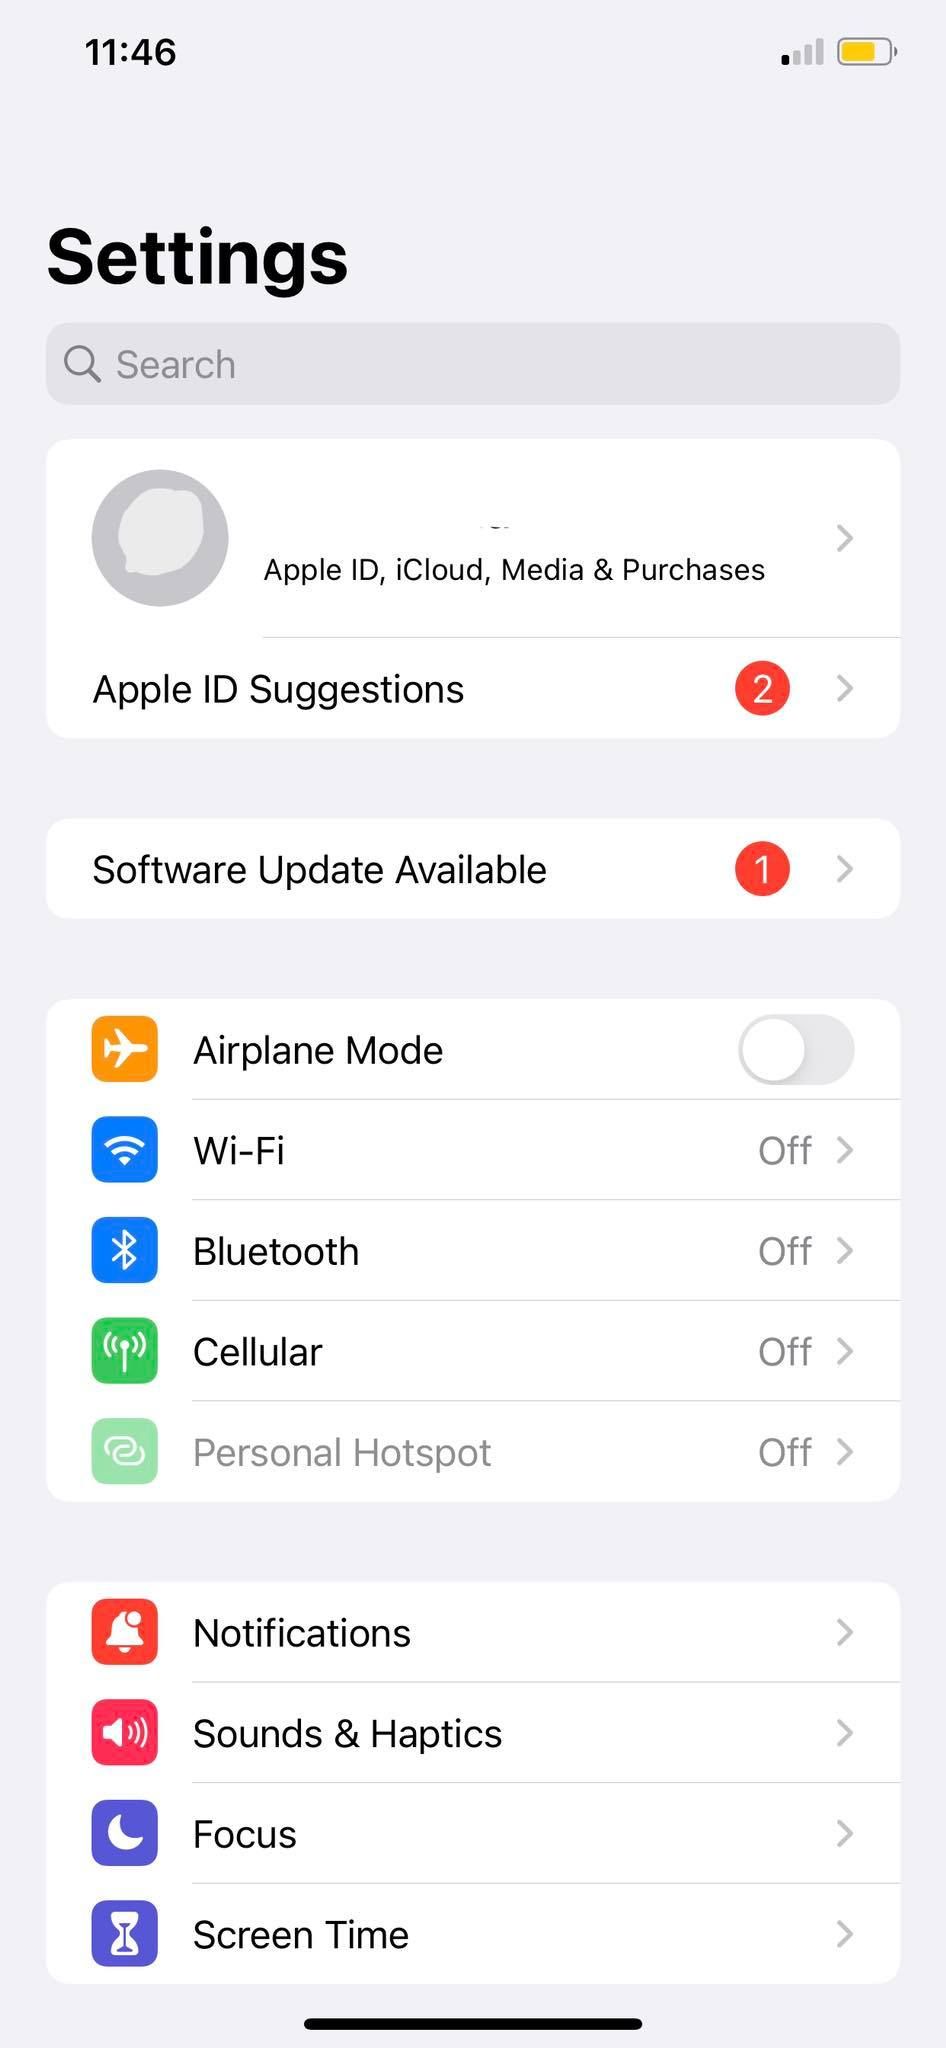 The settings homepage of an iPhone